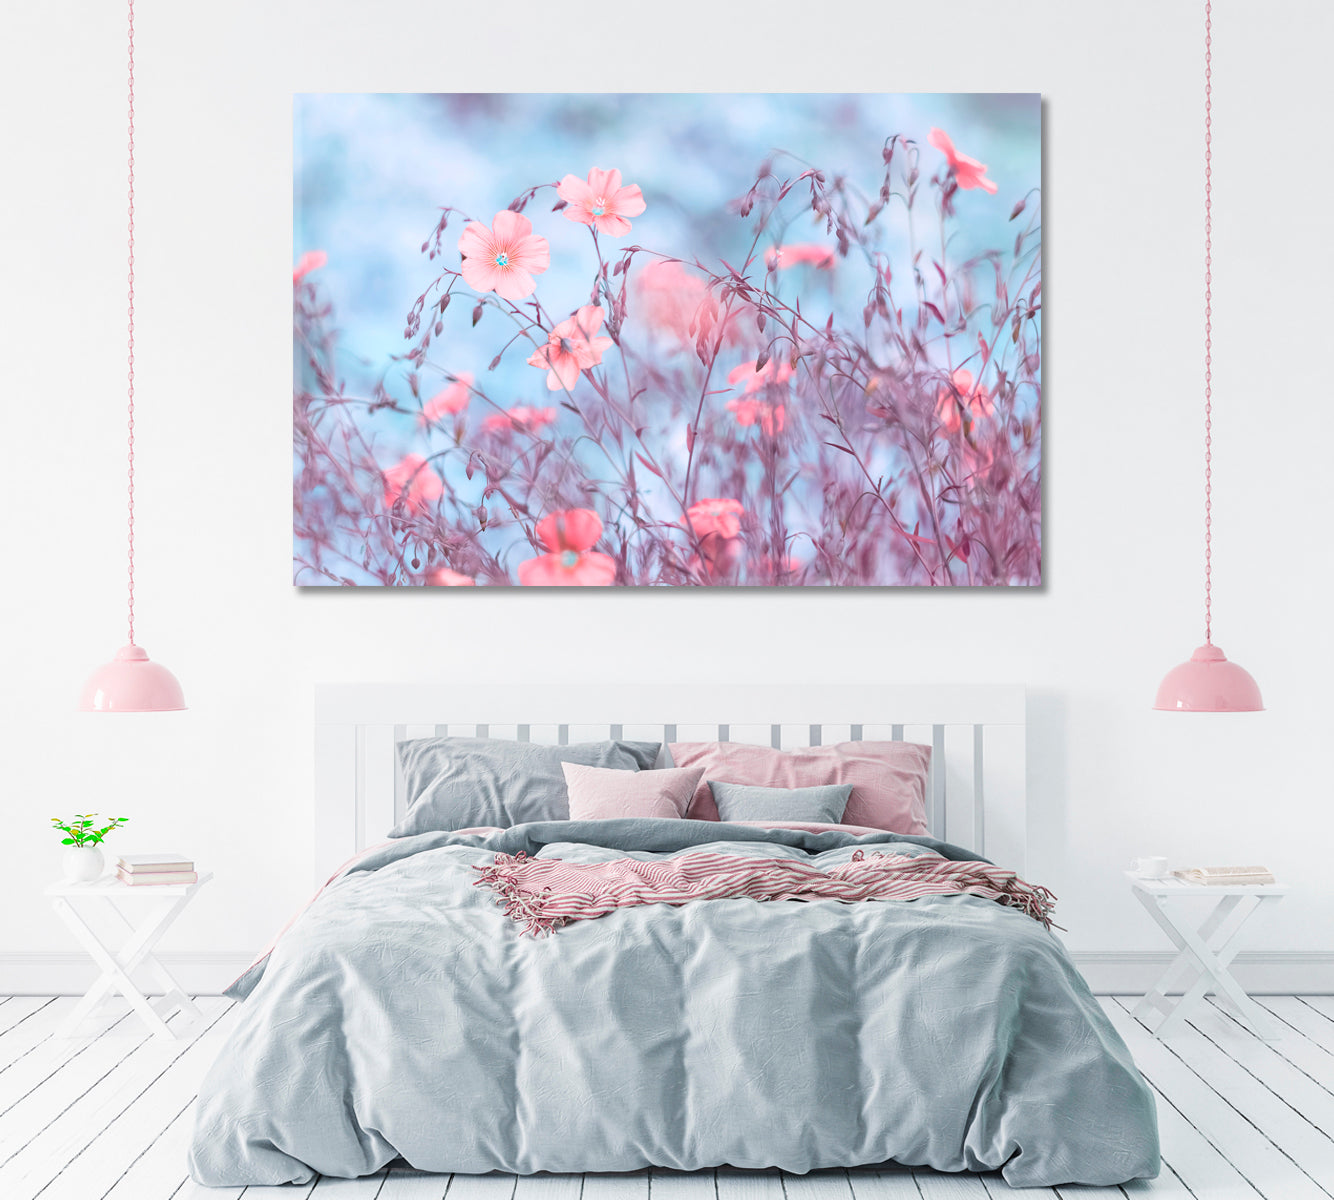 Delicate Pink Flax Flowers Canvas Print ArtLexy 1 Panel 24"x16" inches 